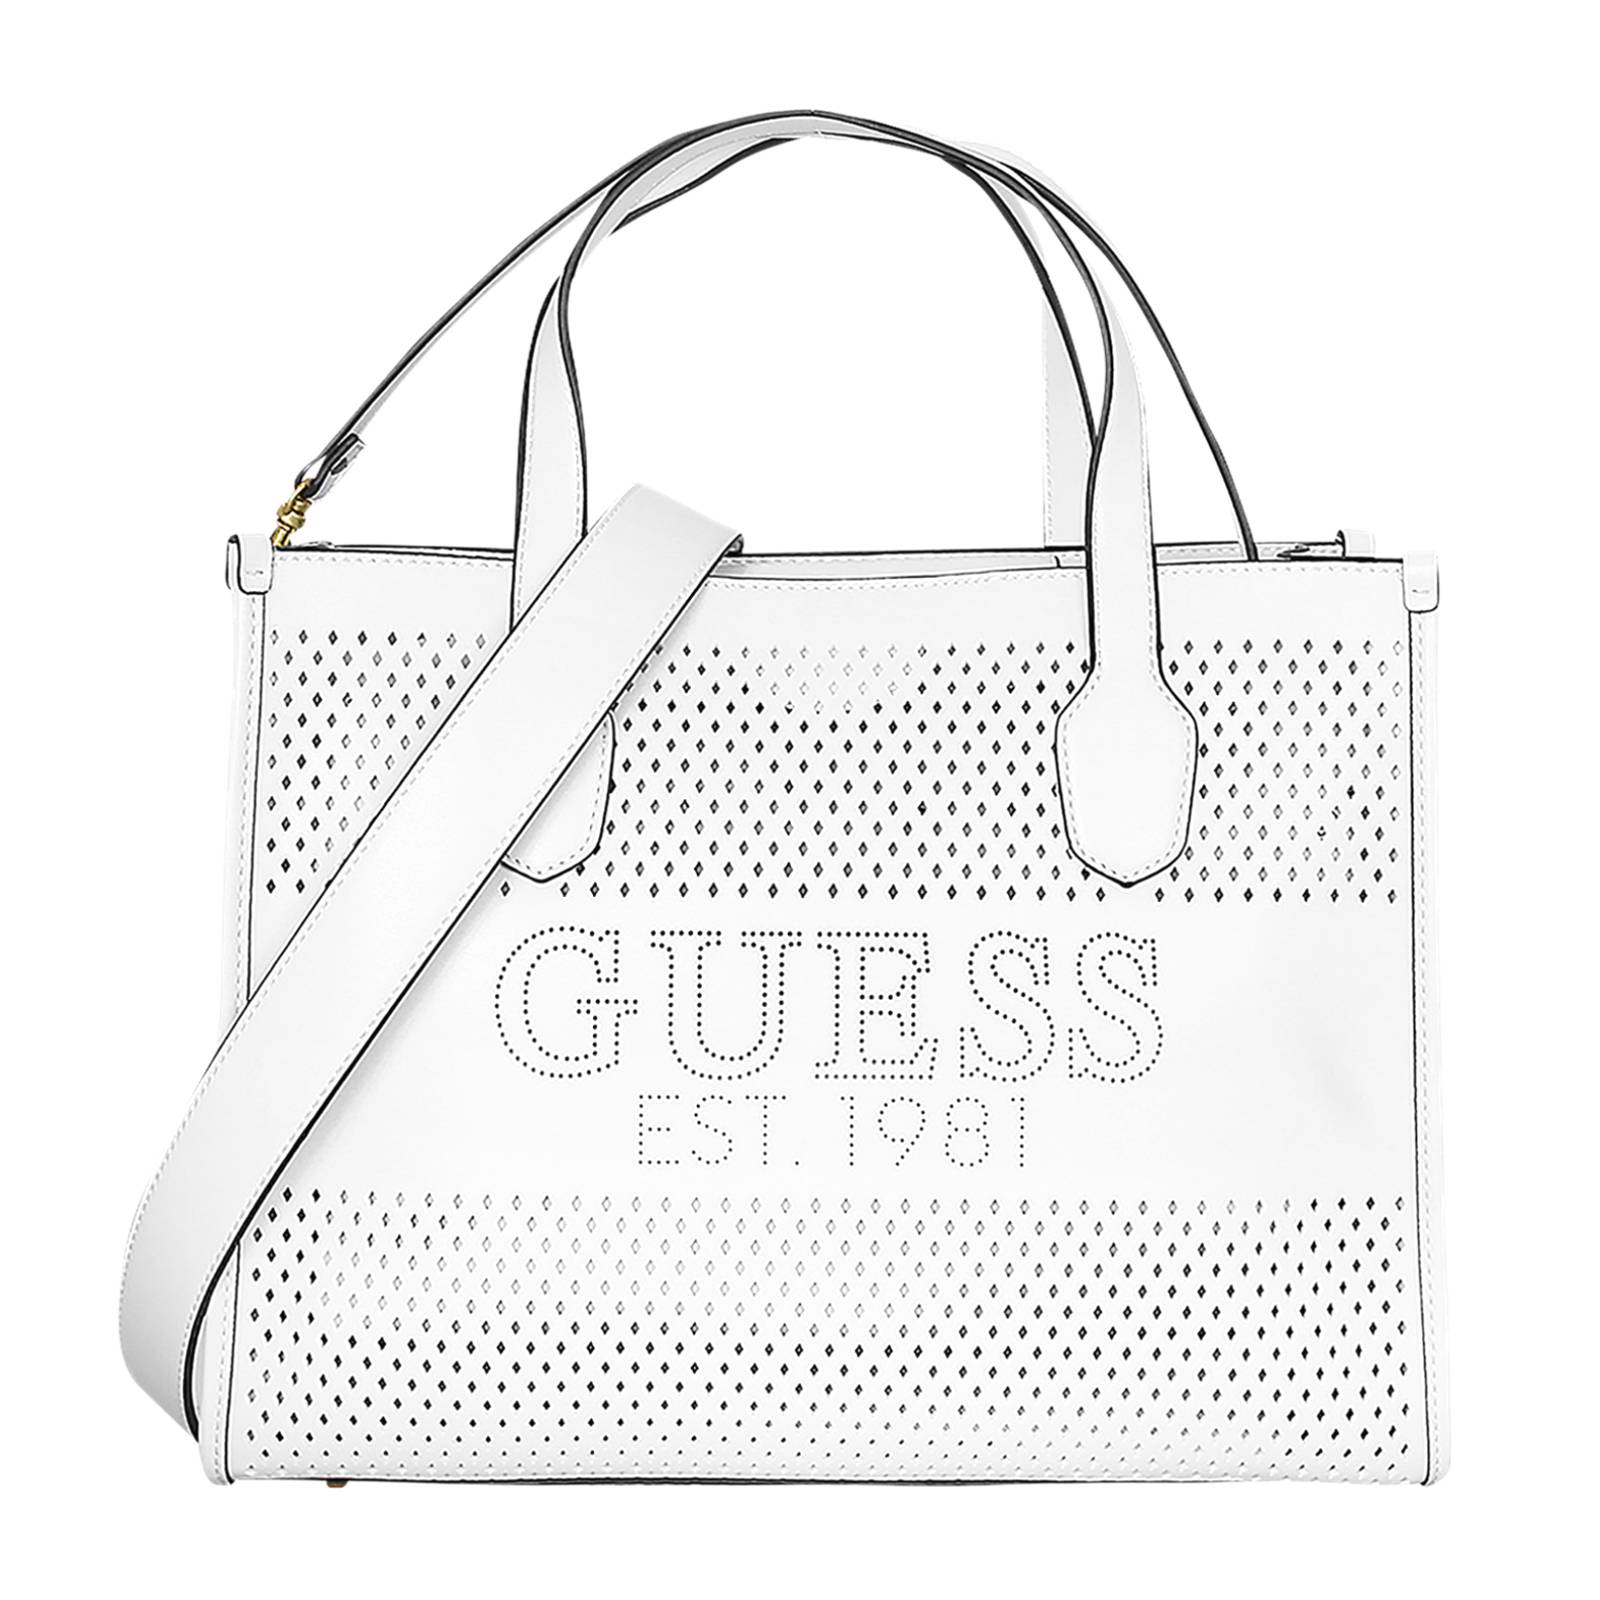 Guess | Bags | Authentic Small Black Guess Purse | Poshmark